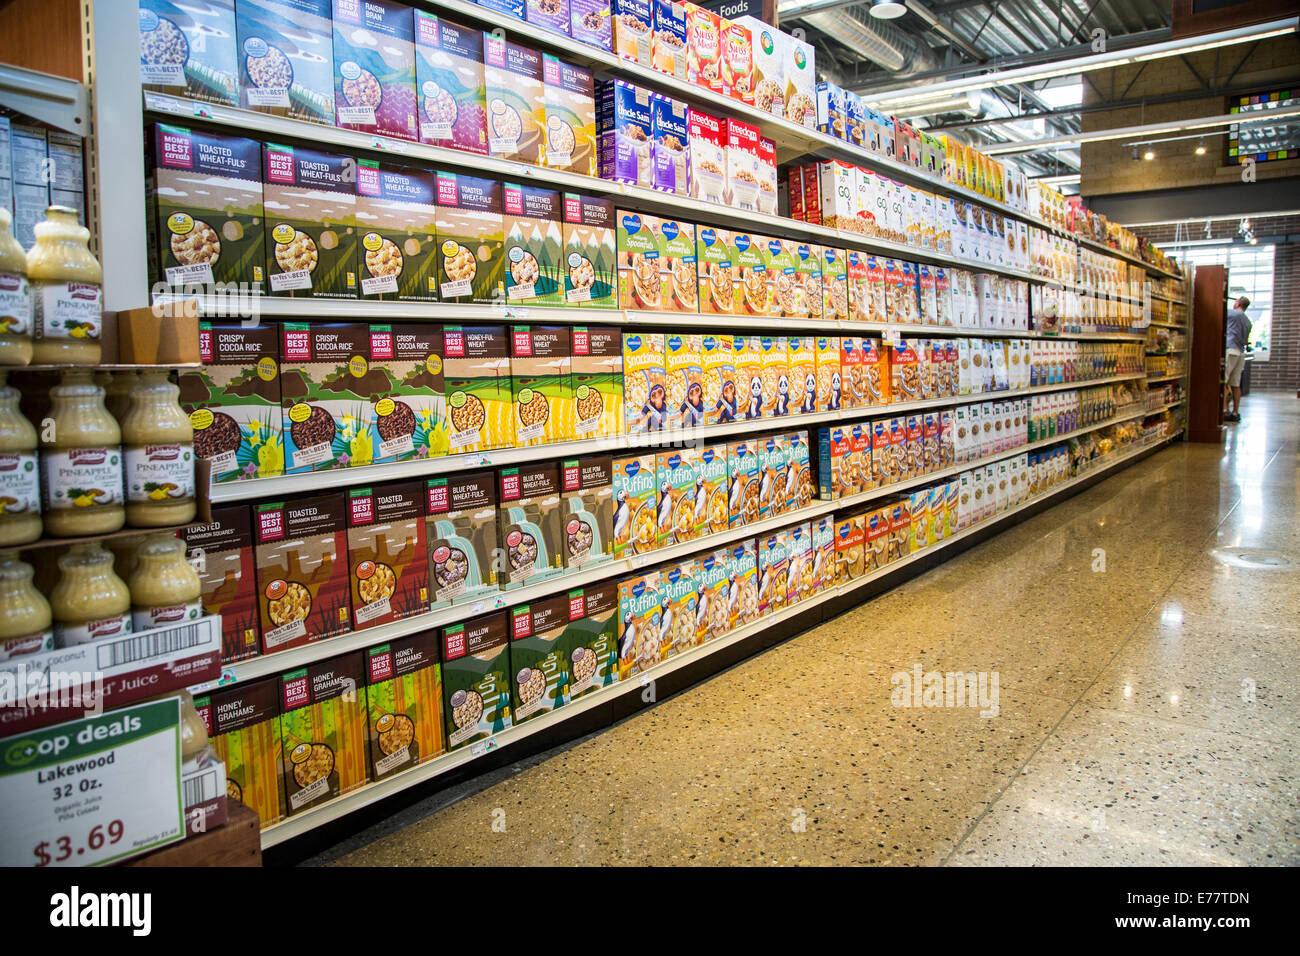 Organic breakfast cereal boxes on the shelves of a natural foods grocery store. Stock Photo